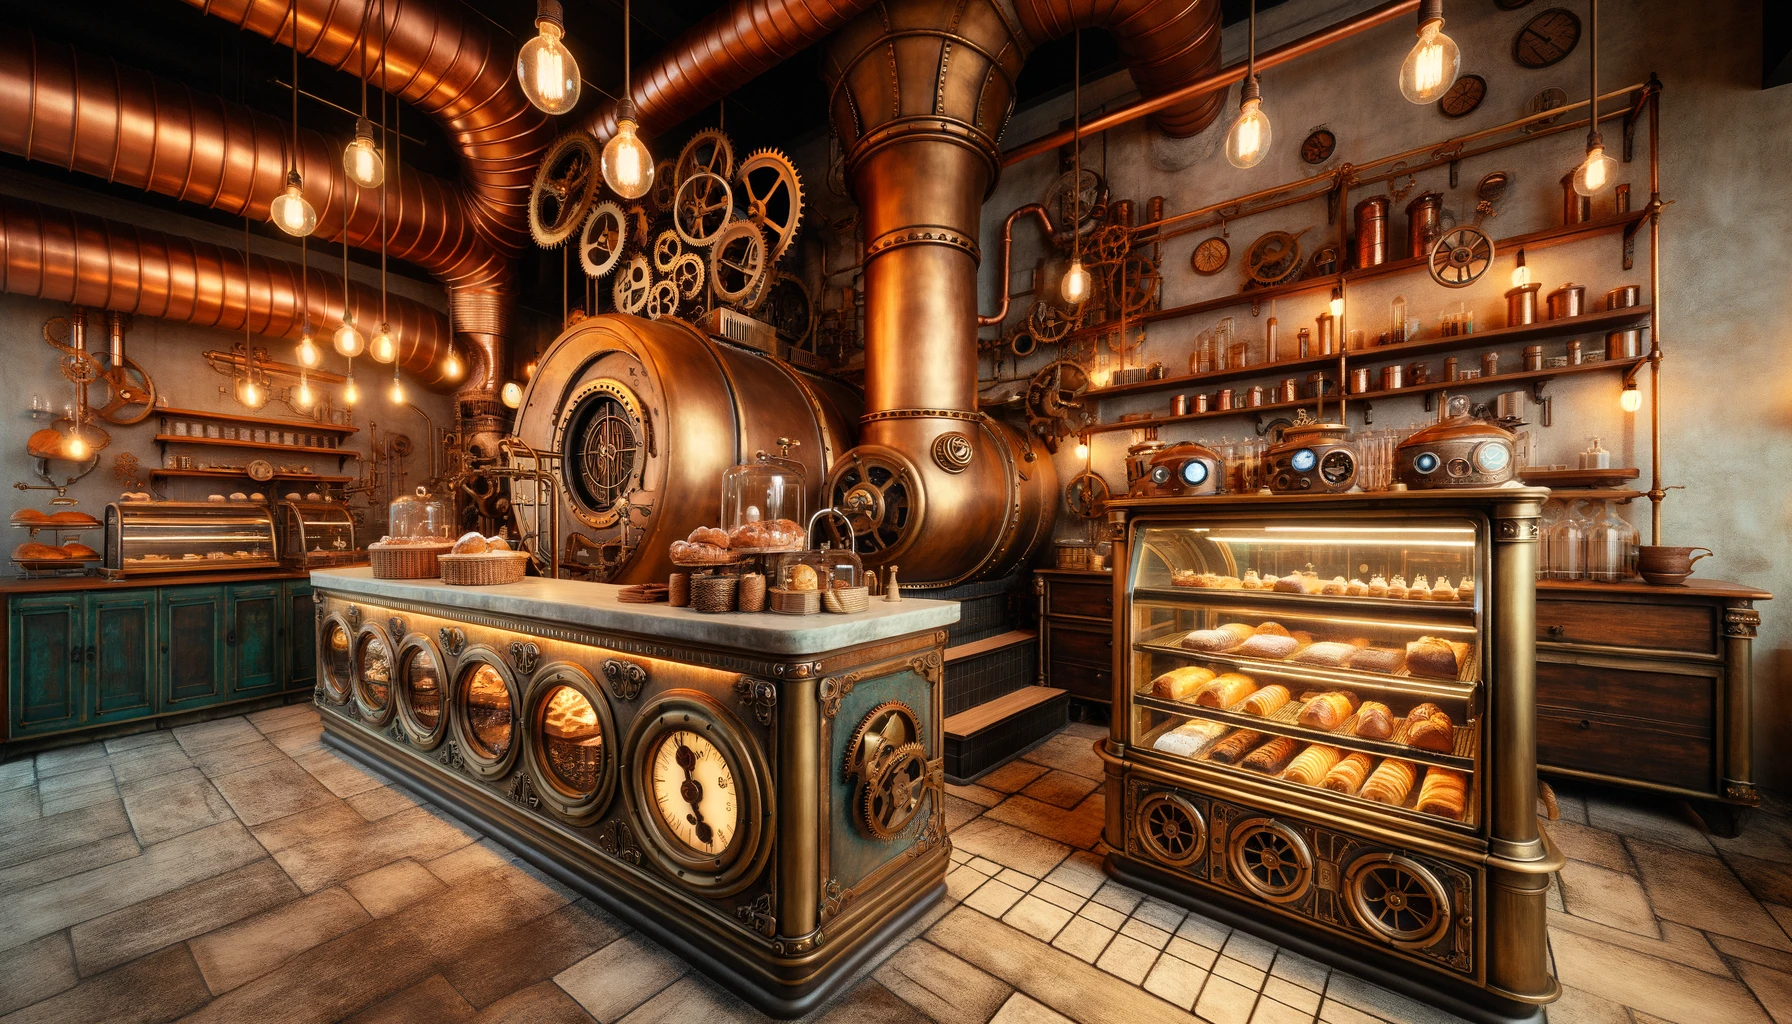 Steampunk style bakery interior with vintage equipment.